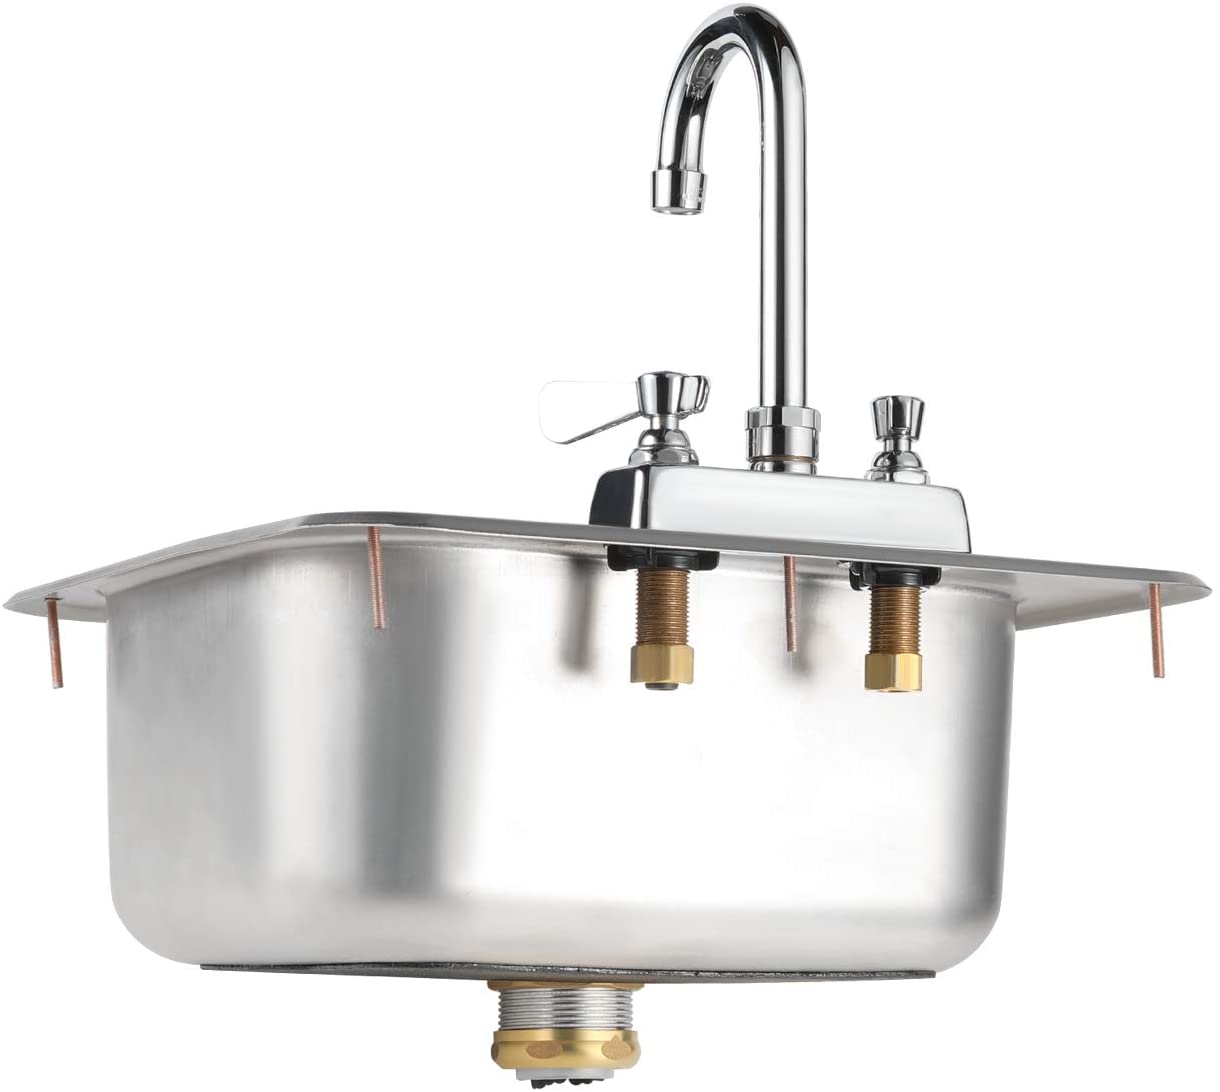 GSW Standard Size 16" x 15" Drop-in Hand Sink with Lead Free 3-1/2” Spout Faucet & Strainer, ETL Certified